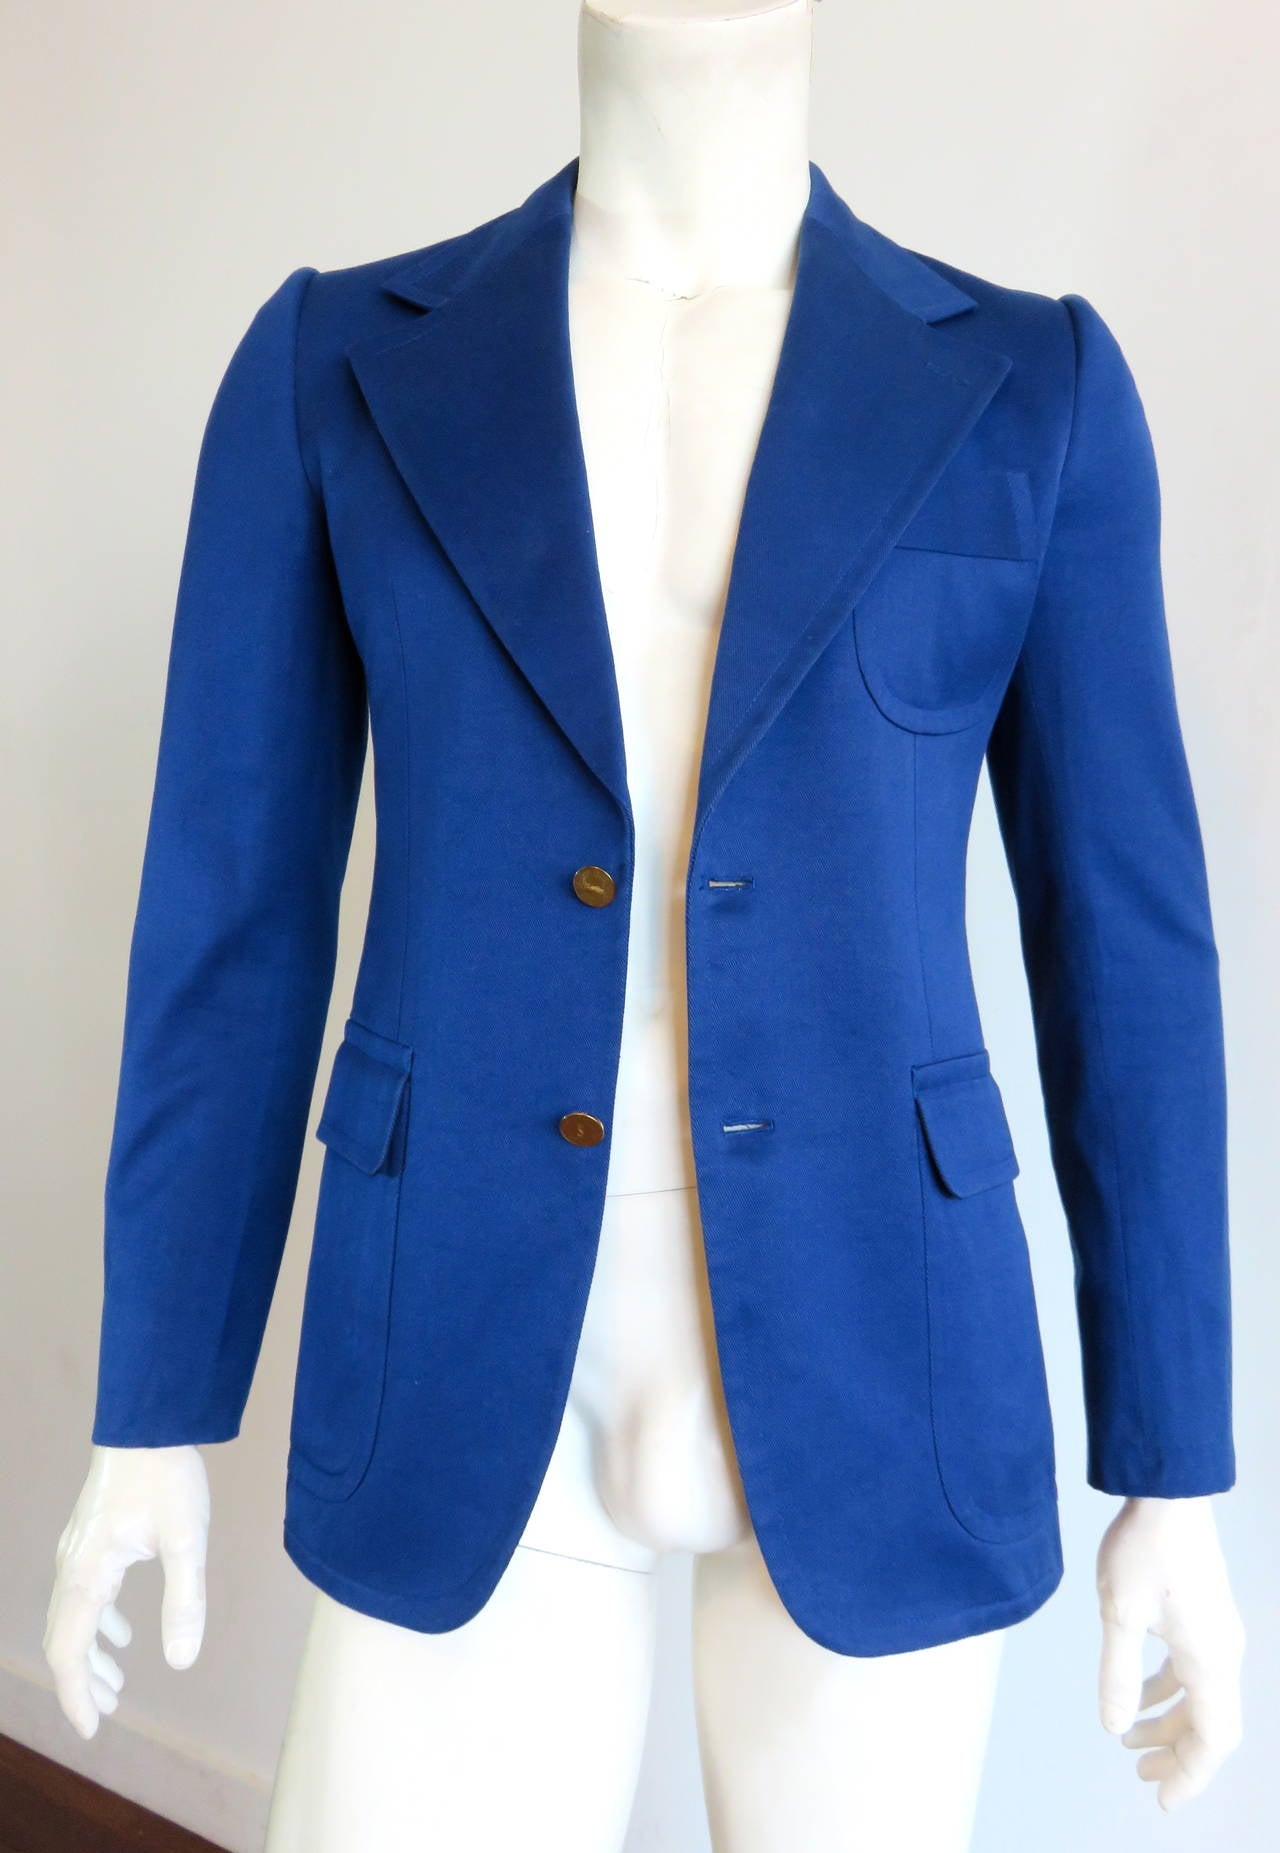 Excellent condition, YVES SAINT LAURENT by Tom Ford Men's French blue, cotton twill blazer jacket.

Logo engraved, polished metal buttons at front and cuffs.

Generously sized, front lapels, with large curved, patch pockets at left chest, and